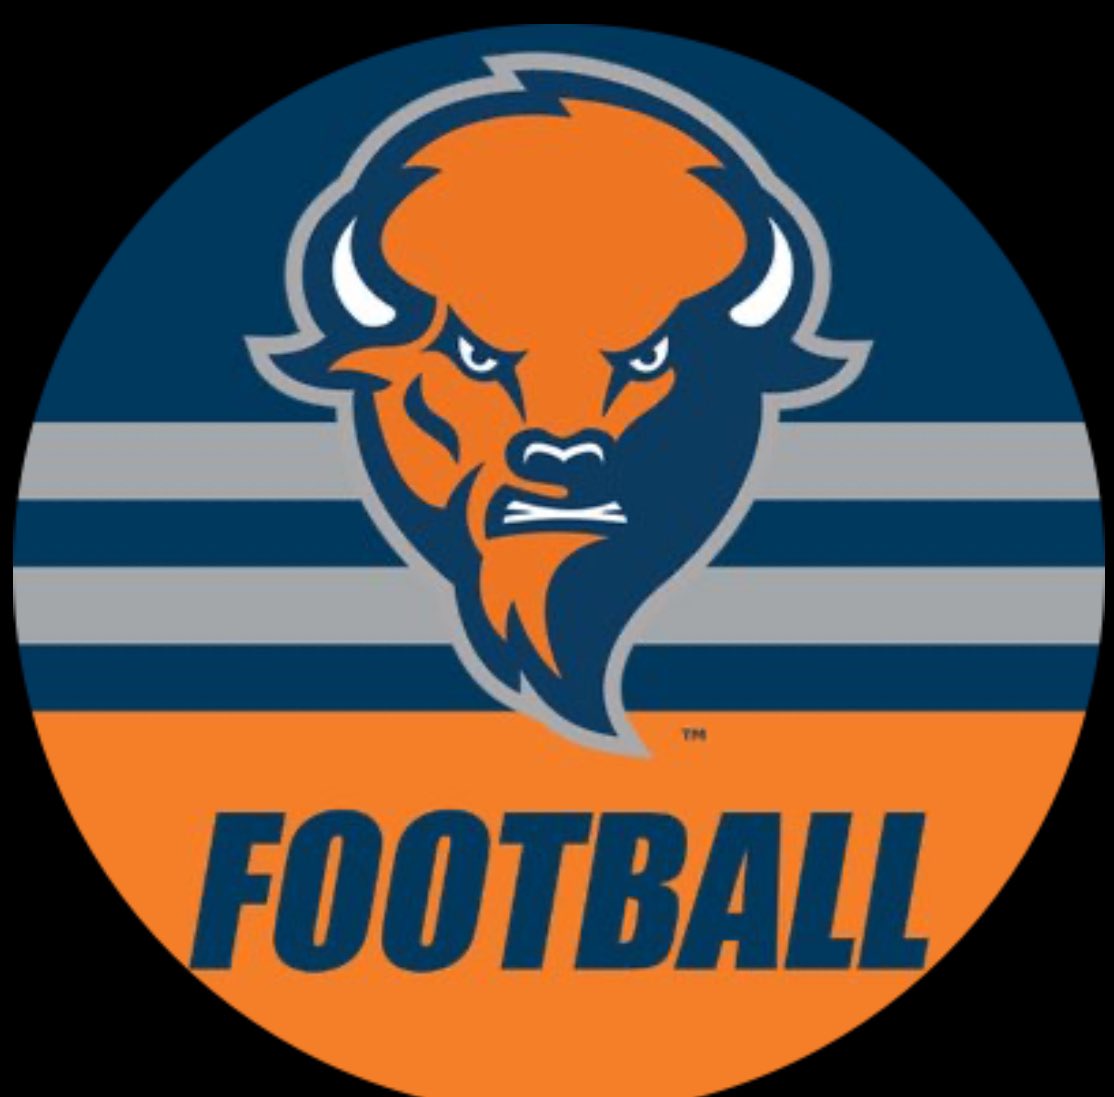 Thank you @Bucknell_FB for stopping by today to check on @lexsayrefb student athletes! @Coach_Bowers #rayBucknell @sayrespartans #corevalues